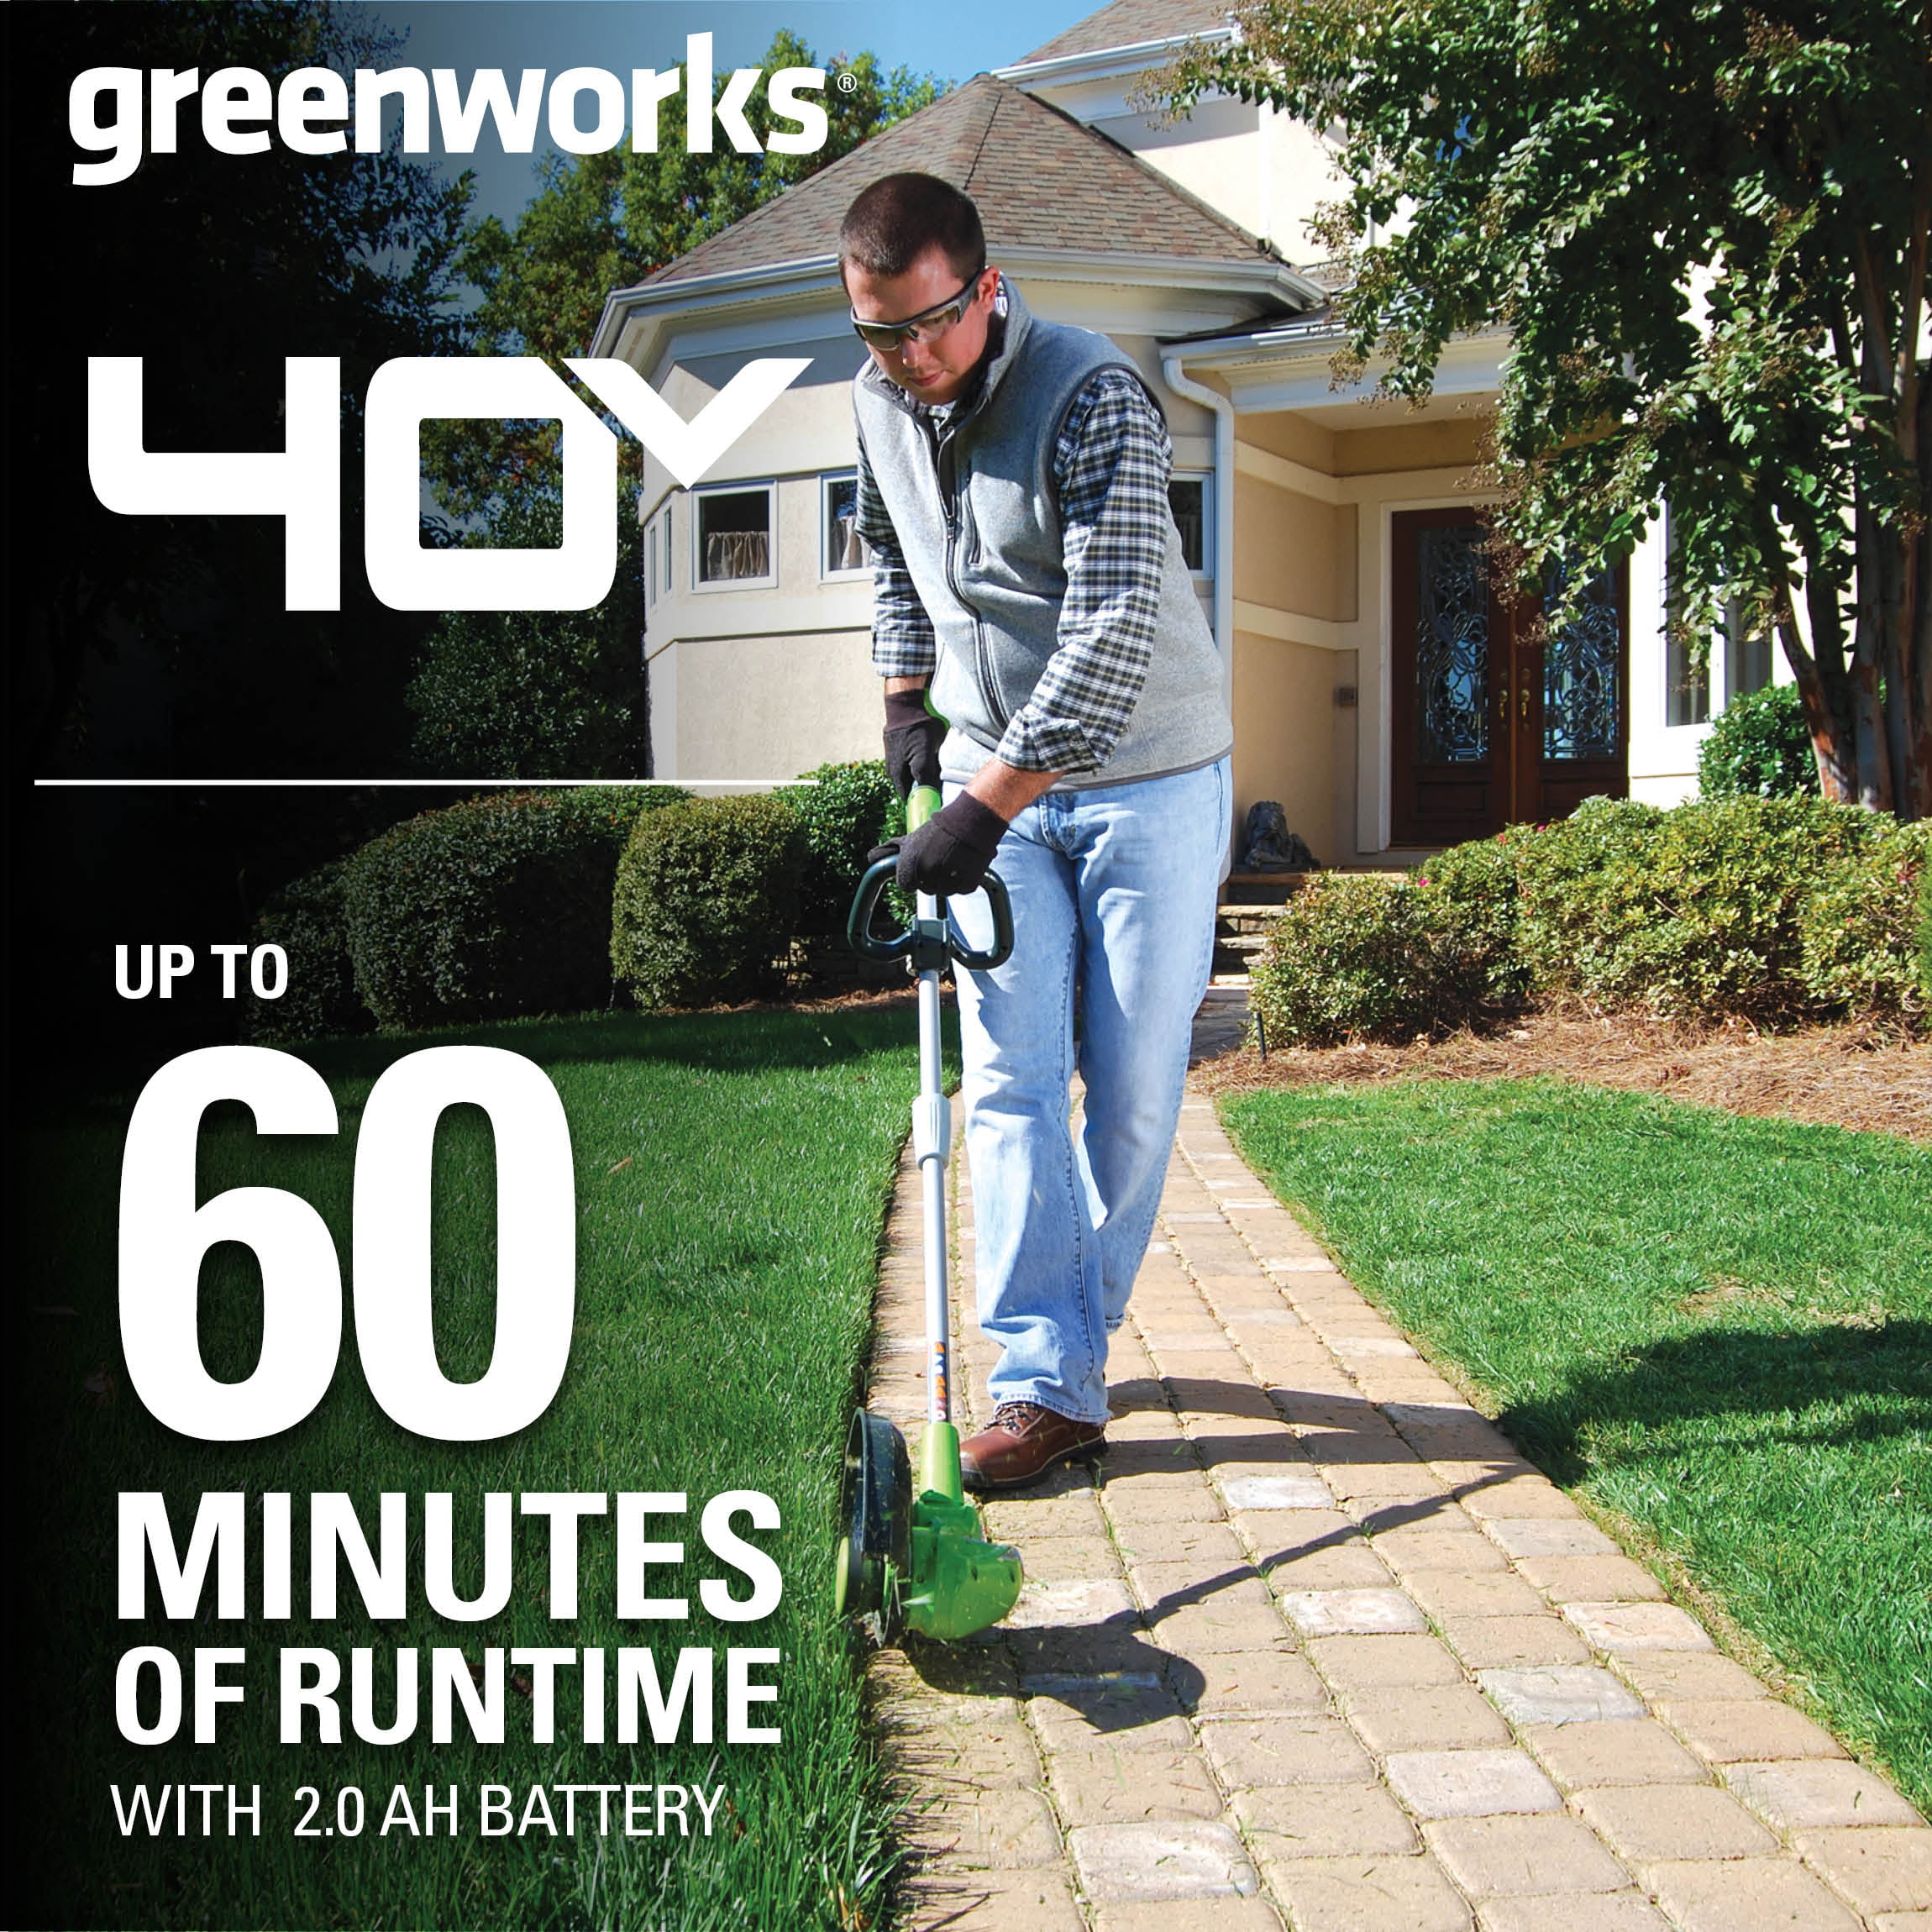 Greenworks G-MAX 40V Lithium-Ion 13-inch Cordless String Trimmer/Edger (Tool Only) 21332